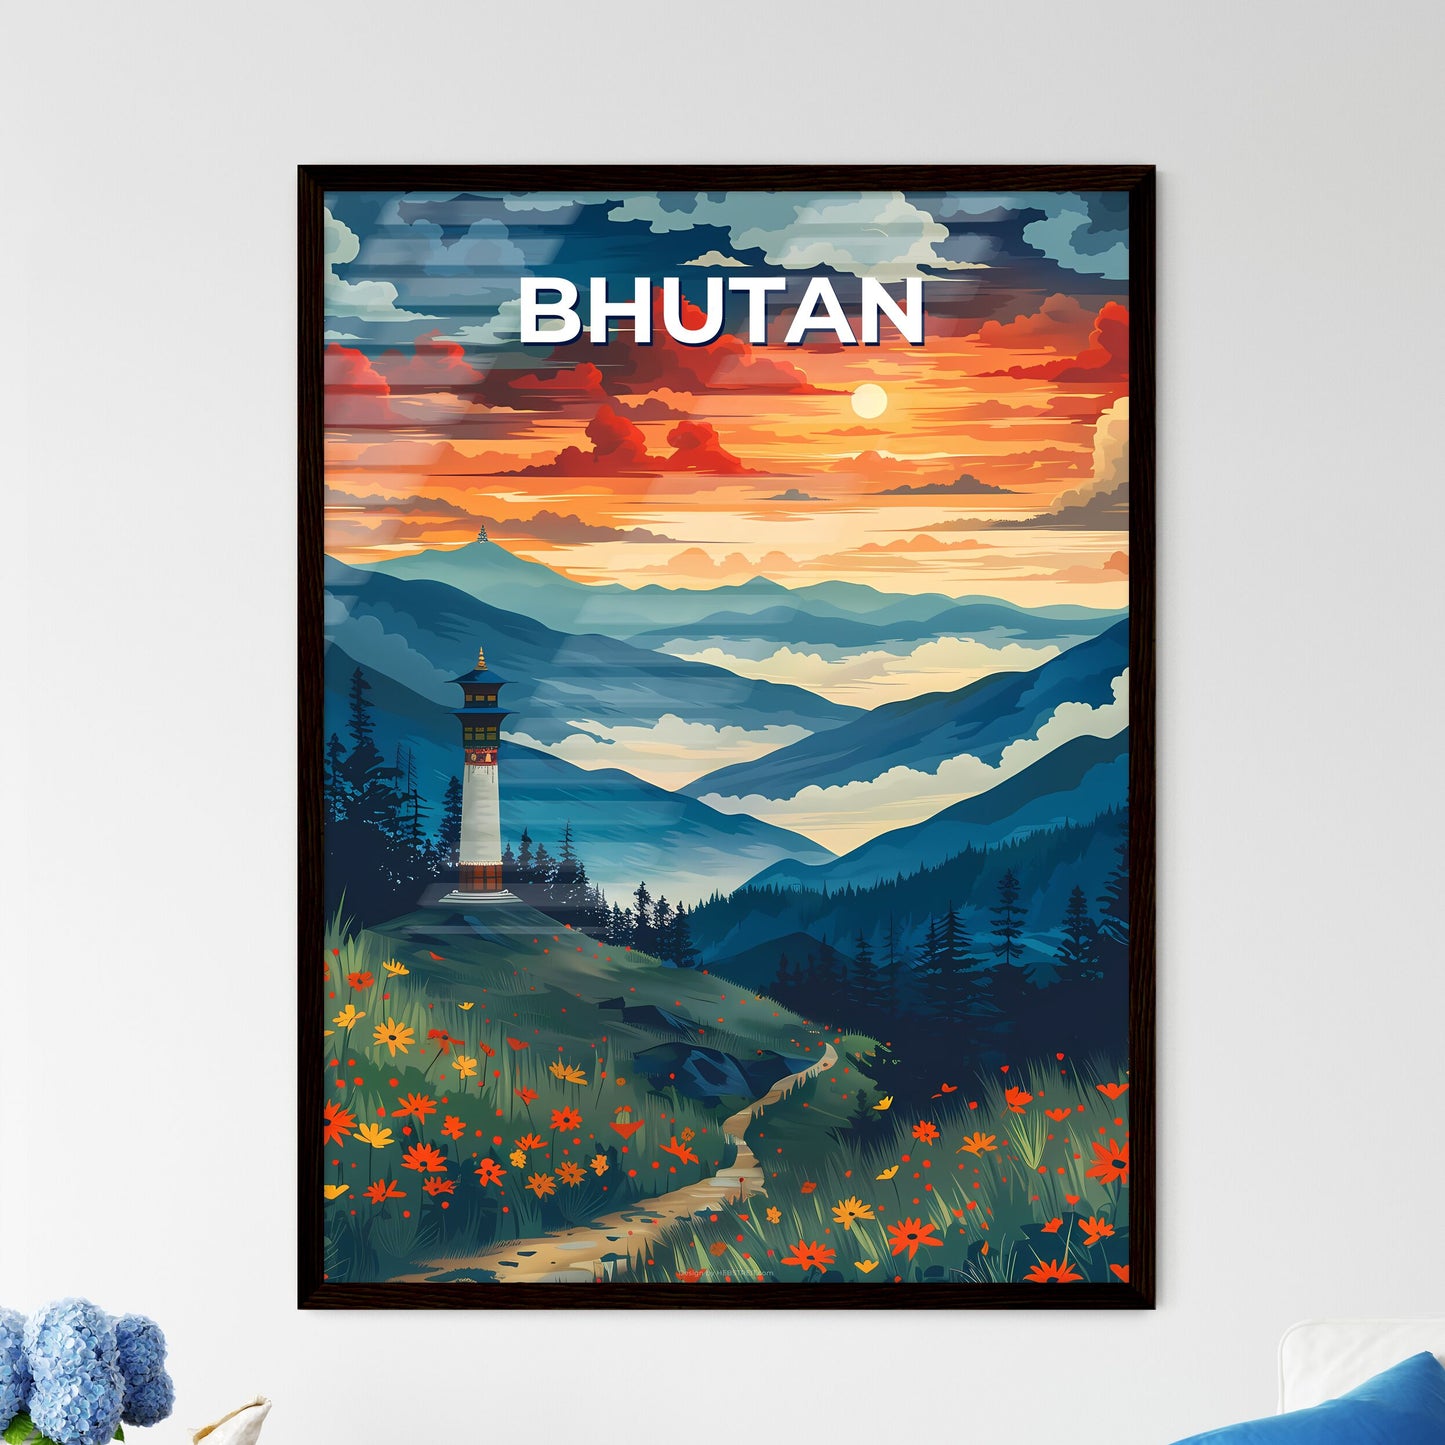 Abstract Lighthouse Landscape Painting, Bhutan, South Asia, Flowers, Vibrant Colors, Art